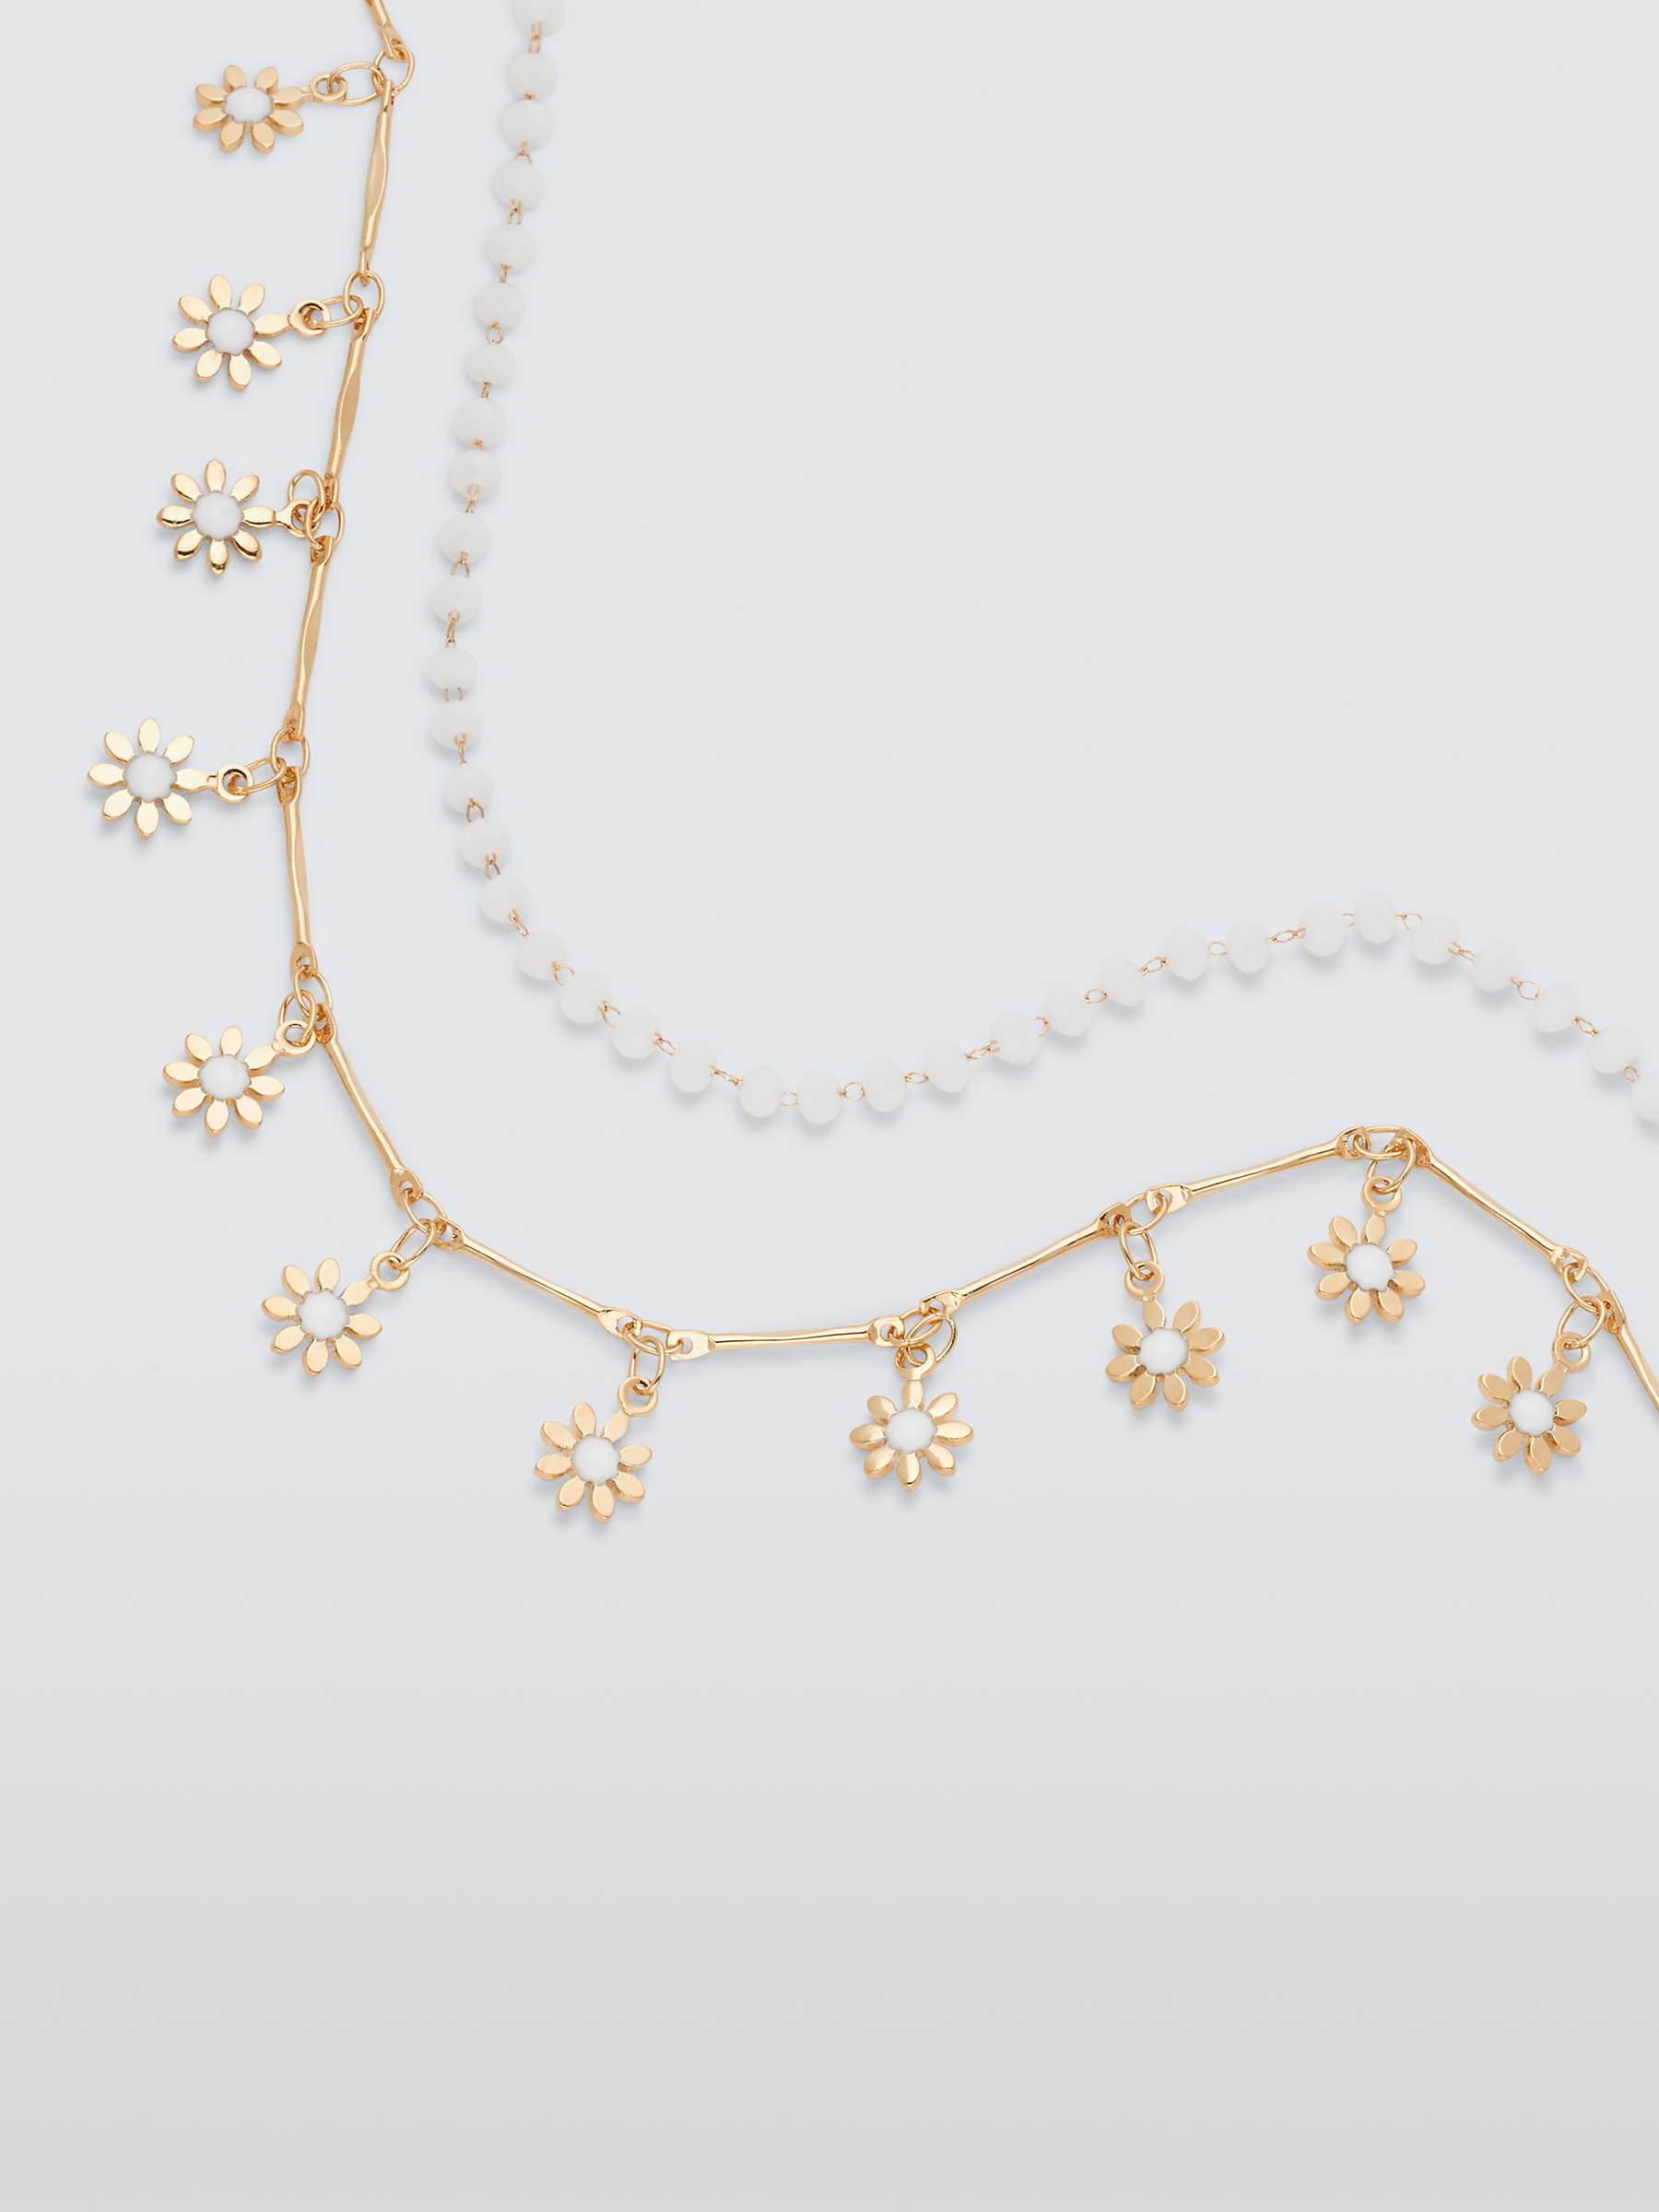 Buy John Lewis Daisy Drop Beaded Necklace, Pack of 2, Gold Online at johnlewis.com